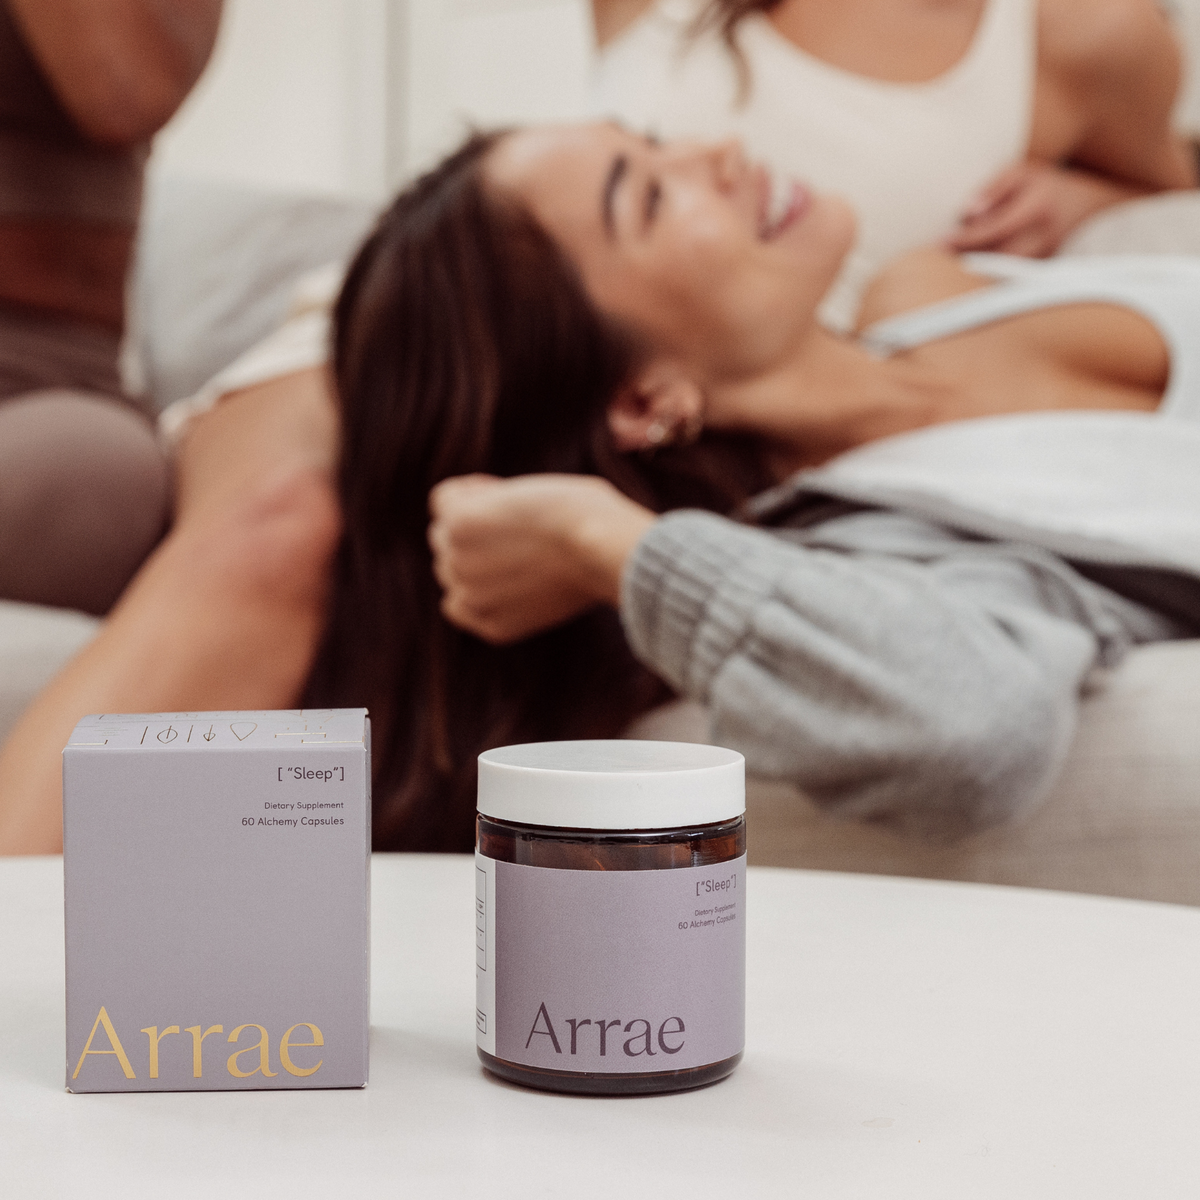 Arrae Sleep Supplement, jar & box - A bottles of 60 capsules featuring a blend of natural ingredients, designed to promote restful sleep and relaxation without melatonin.